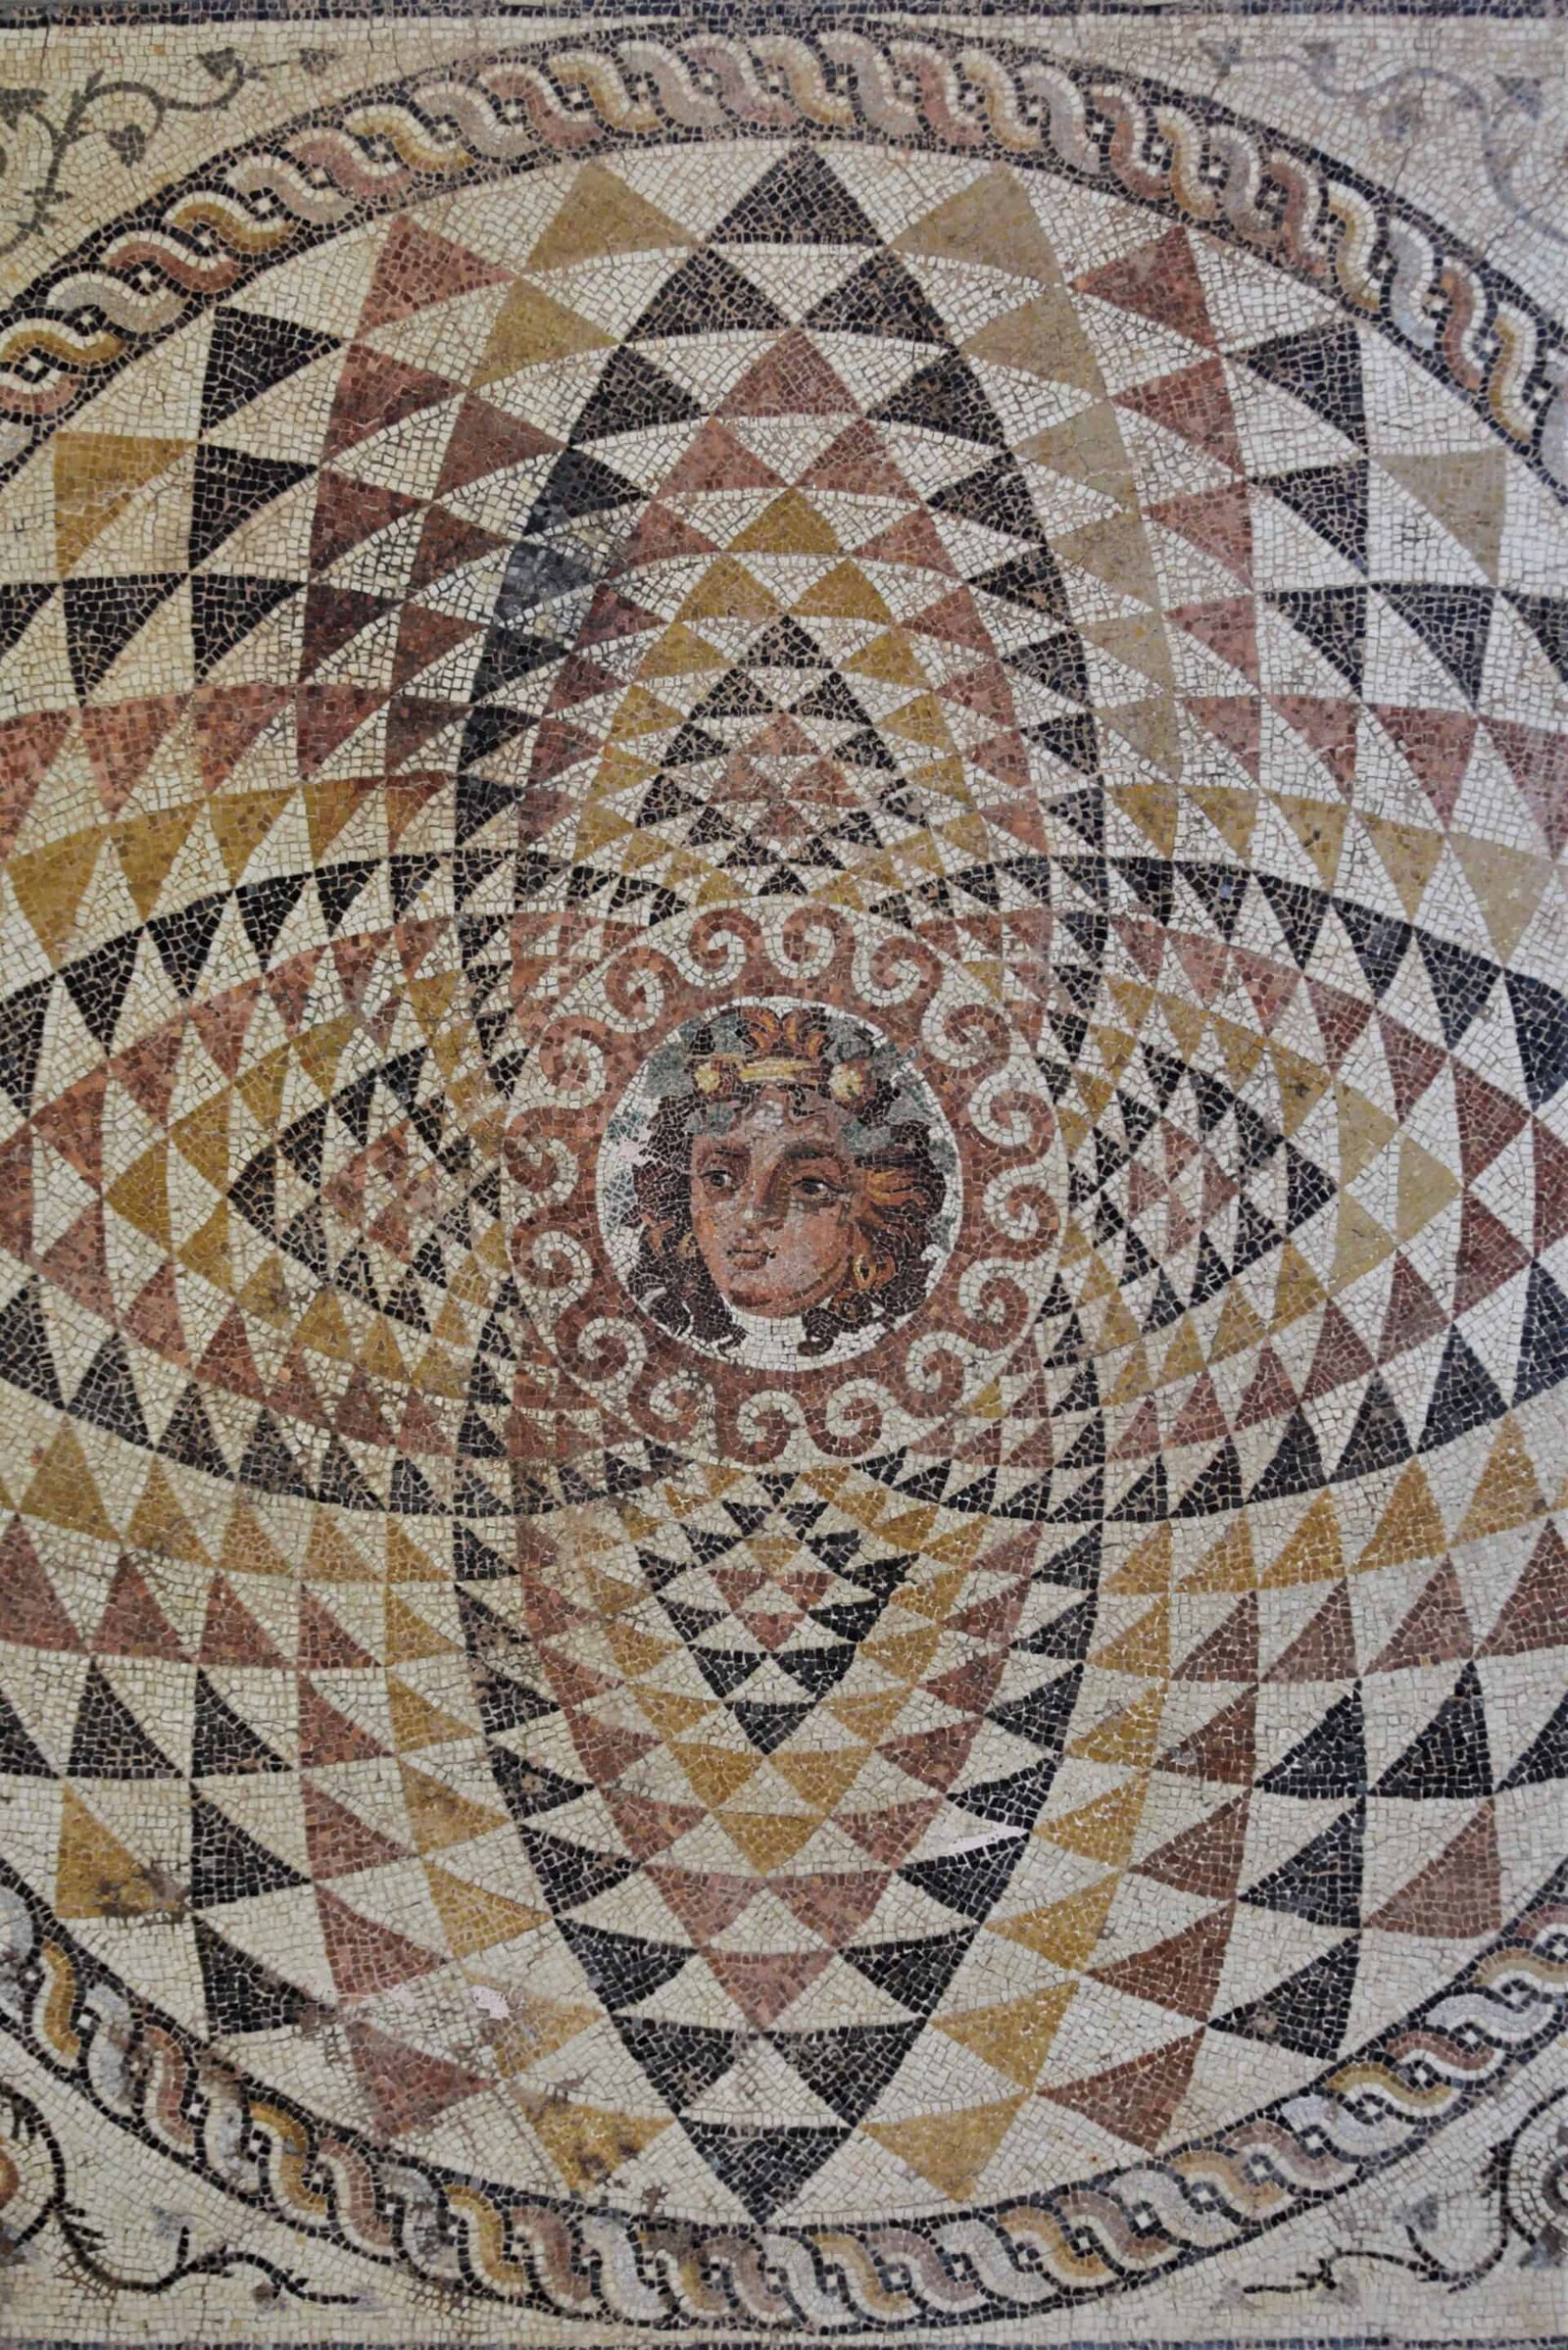 red, yellow, black, and white mosaic showing geometrical patterns circling around the head of a redheaded boy